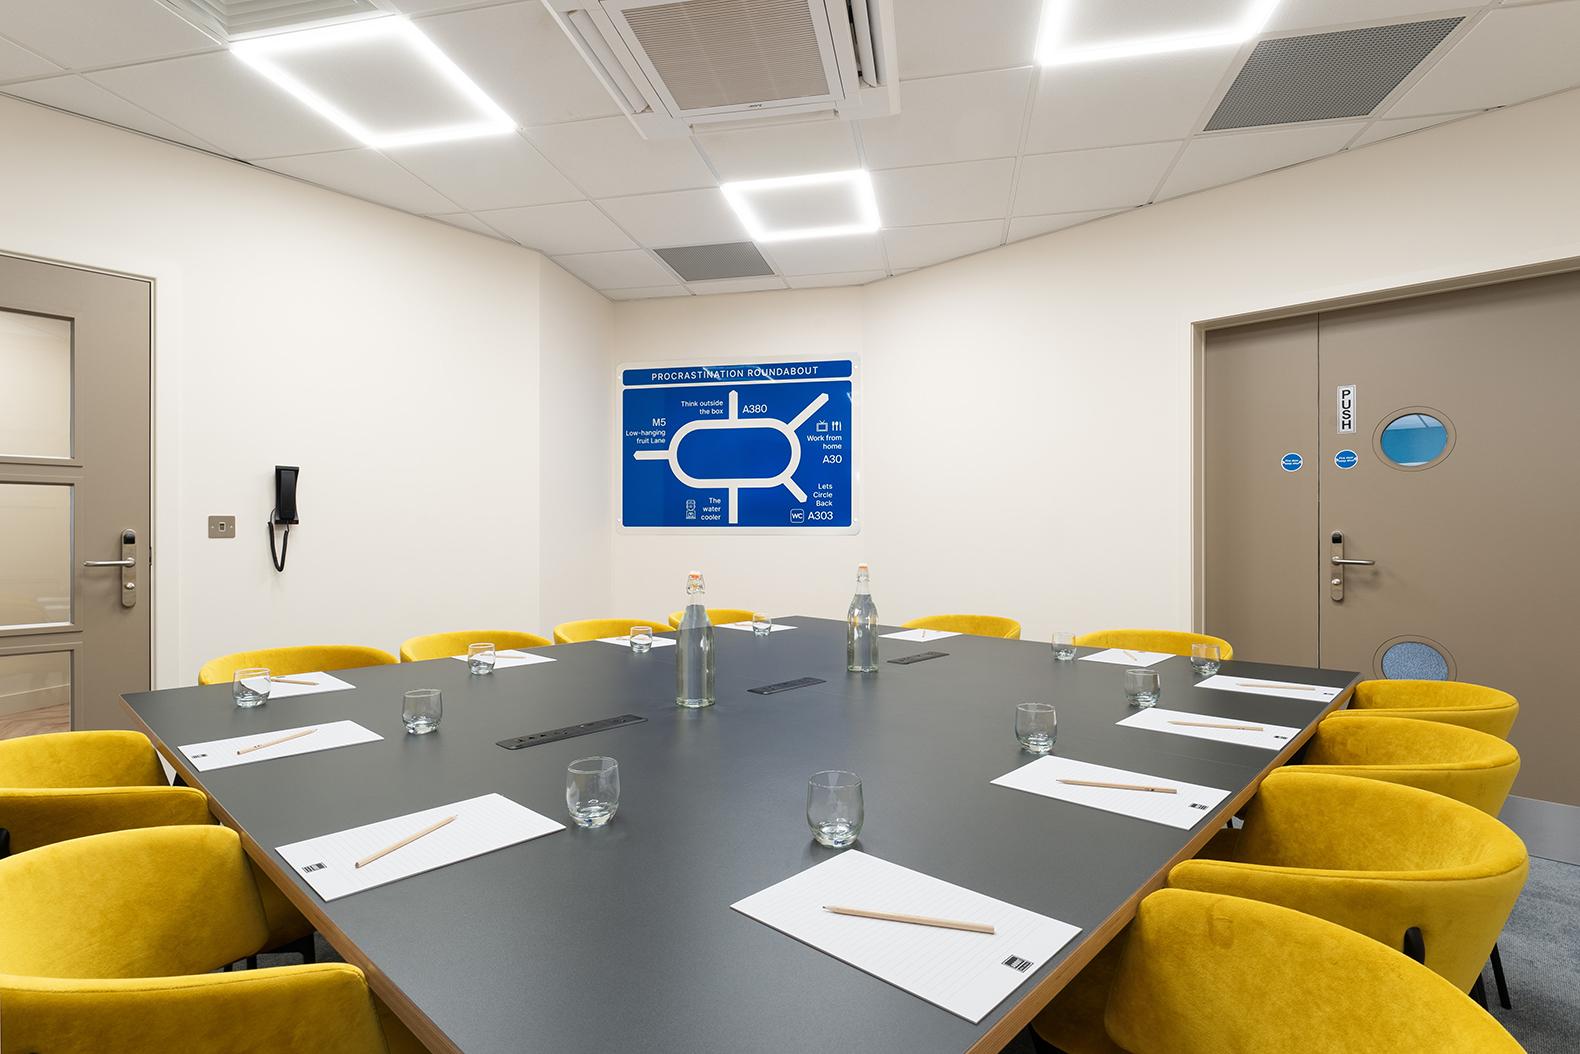 About-Time Boardroom, Hampton By Hilton Torquay photo #9